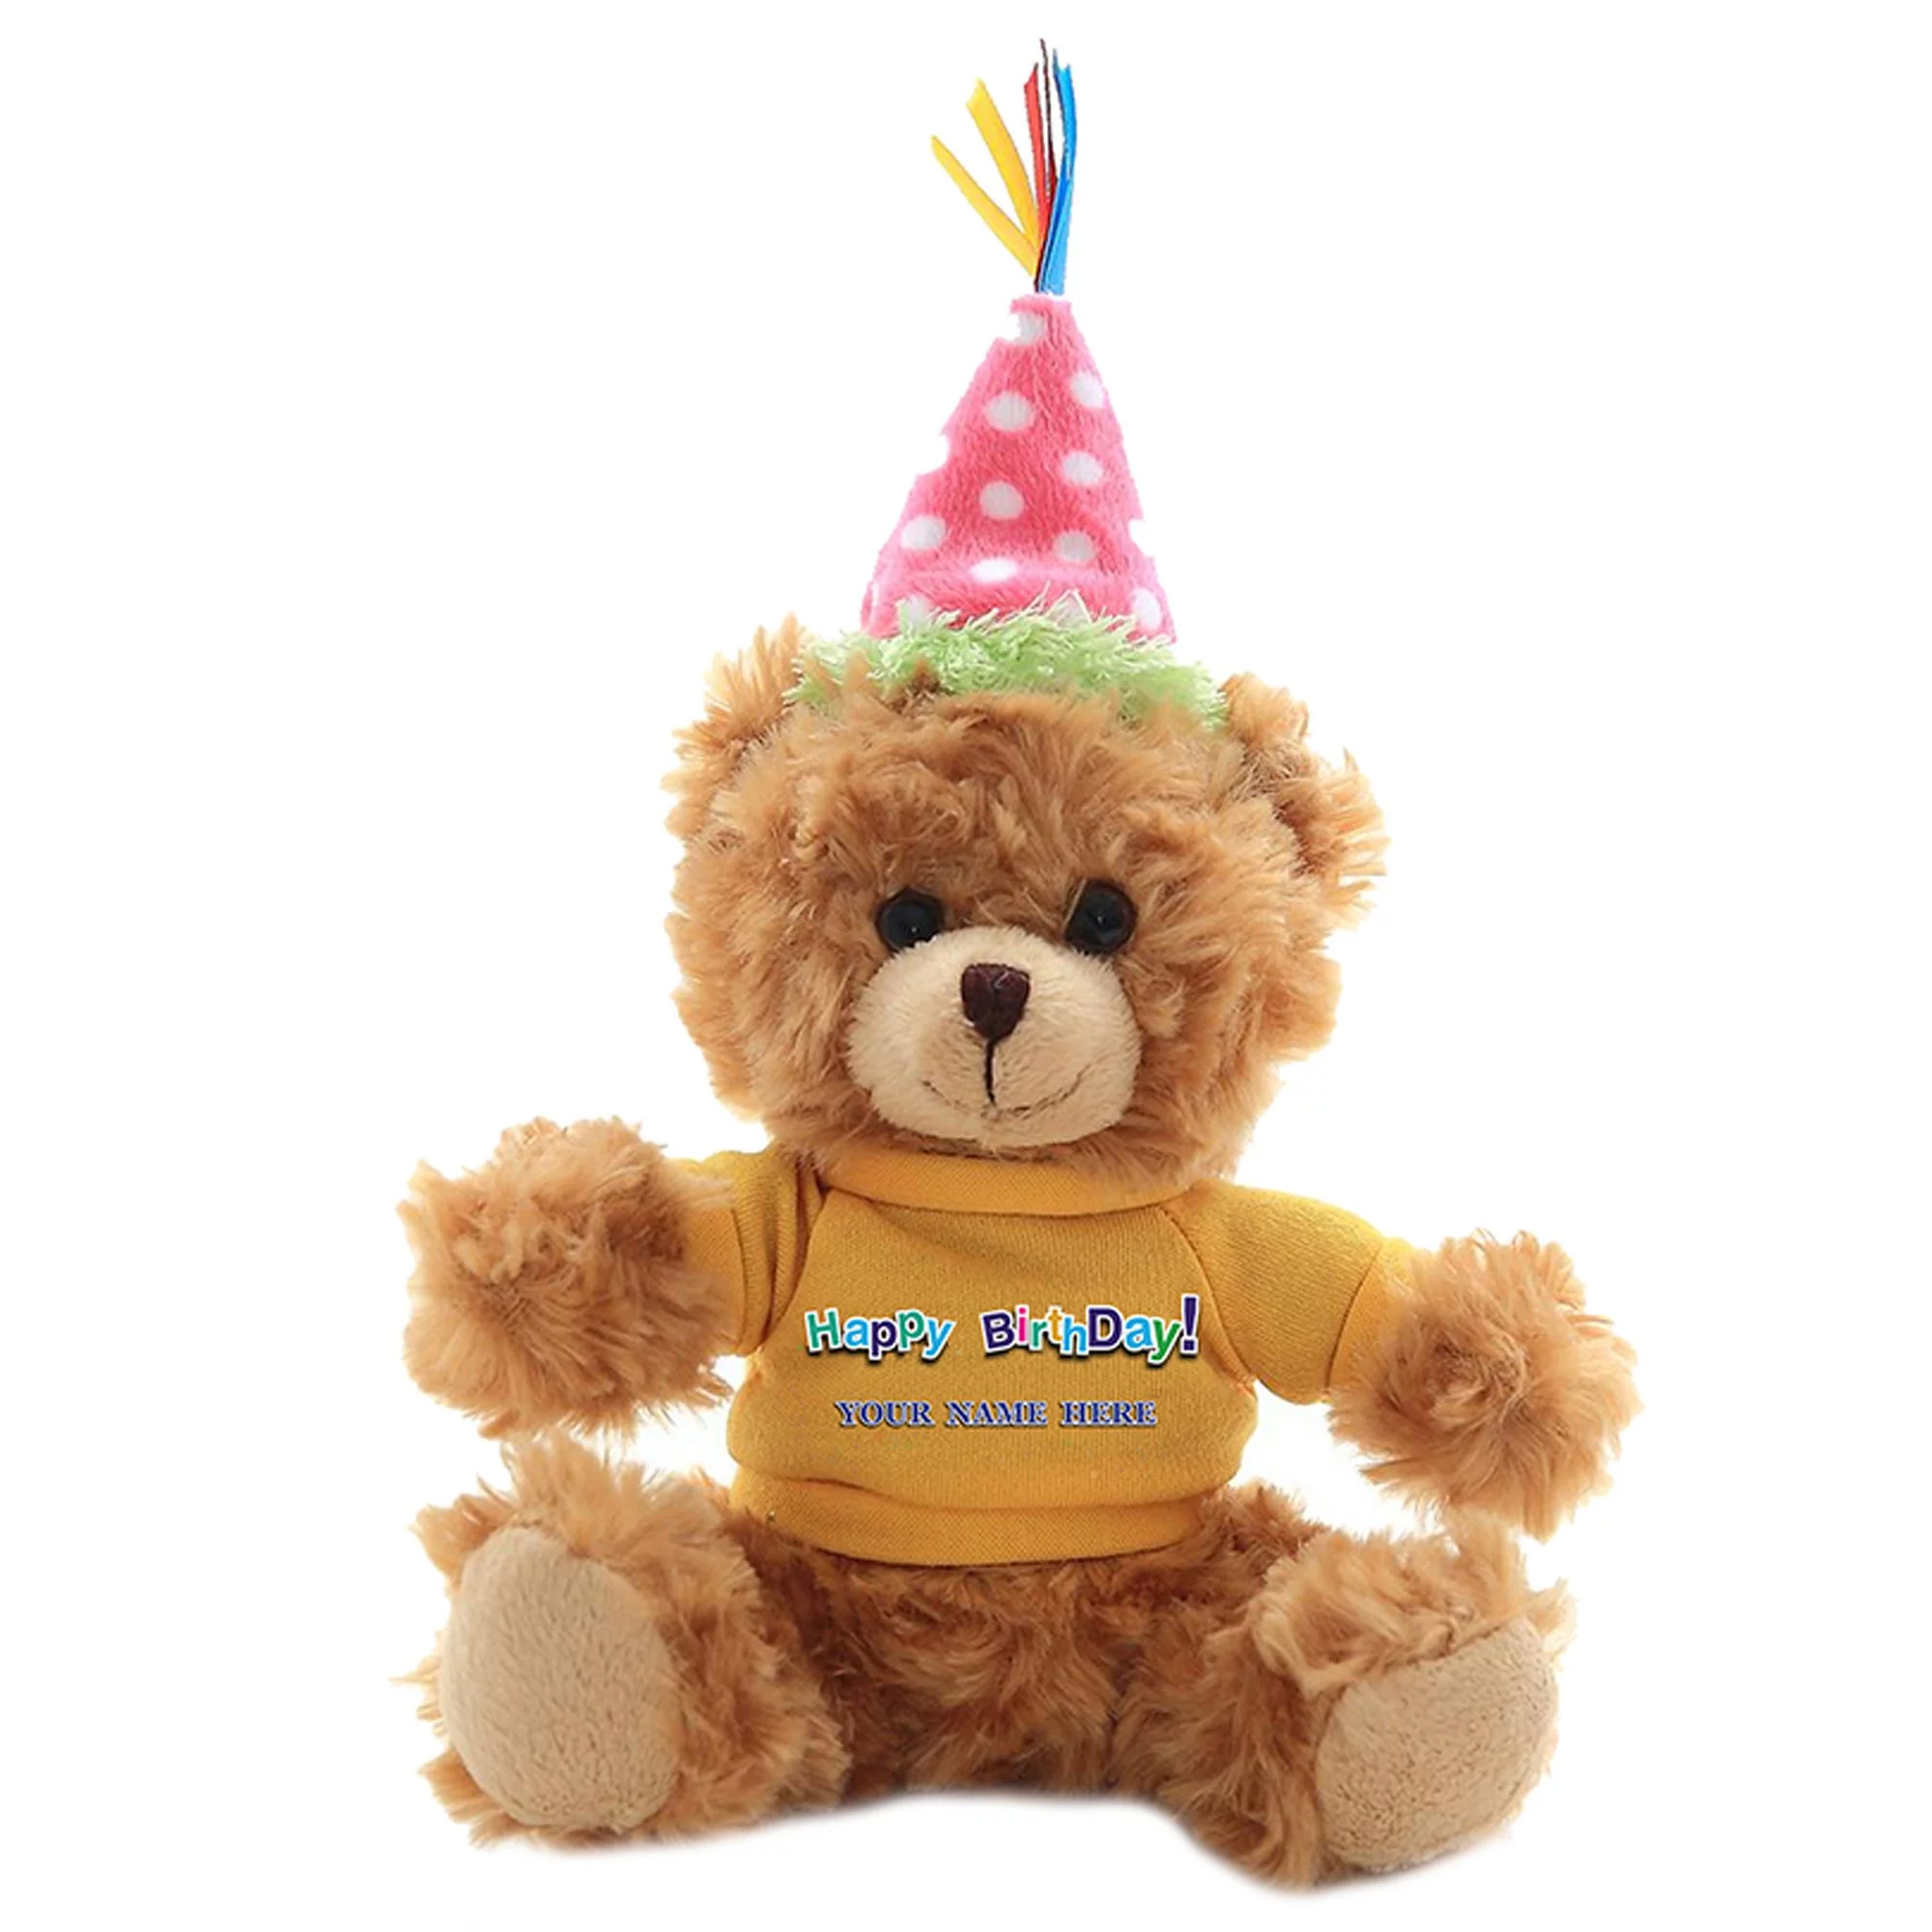 Plushland Plush Teddy Bear 6 Inches - Mocha Color for Birthday, Personalized Text, Name on T-Shirt, Party Favors Gift for Kids, Boys, Girls